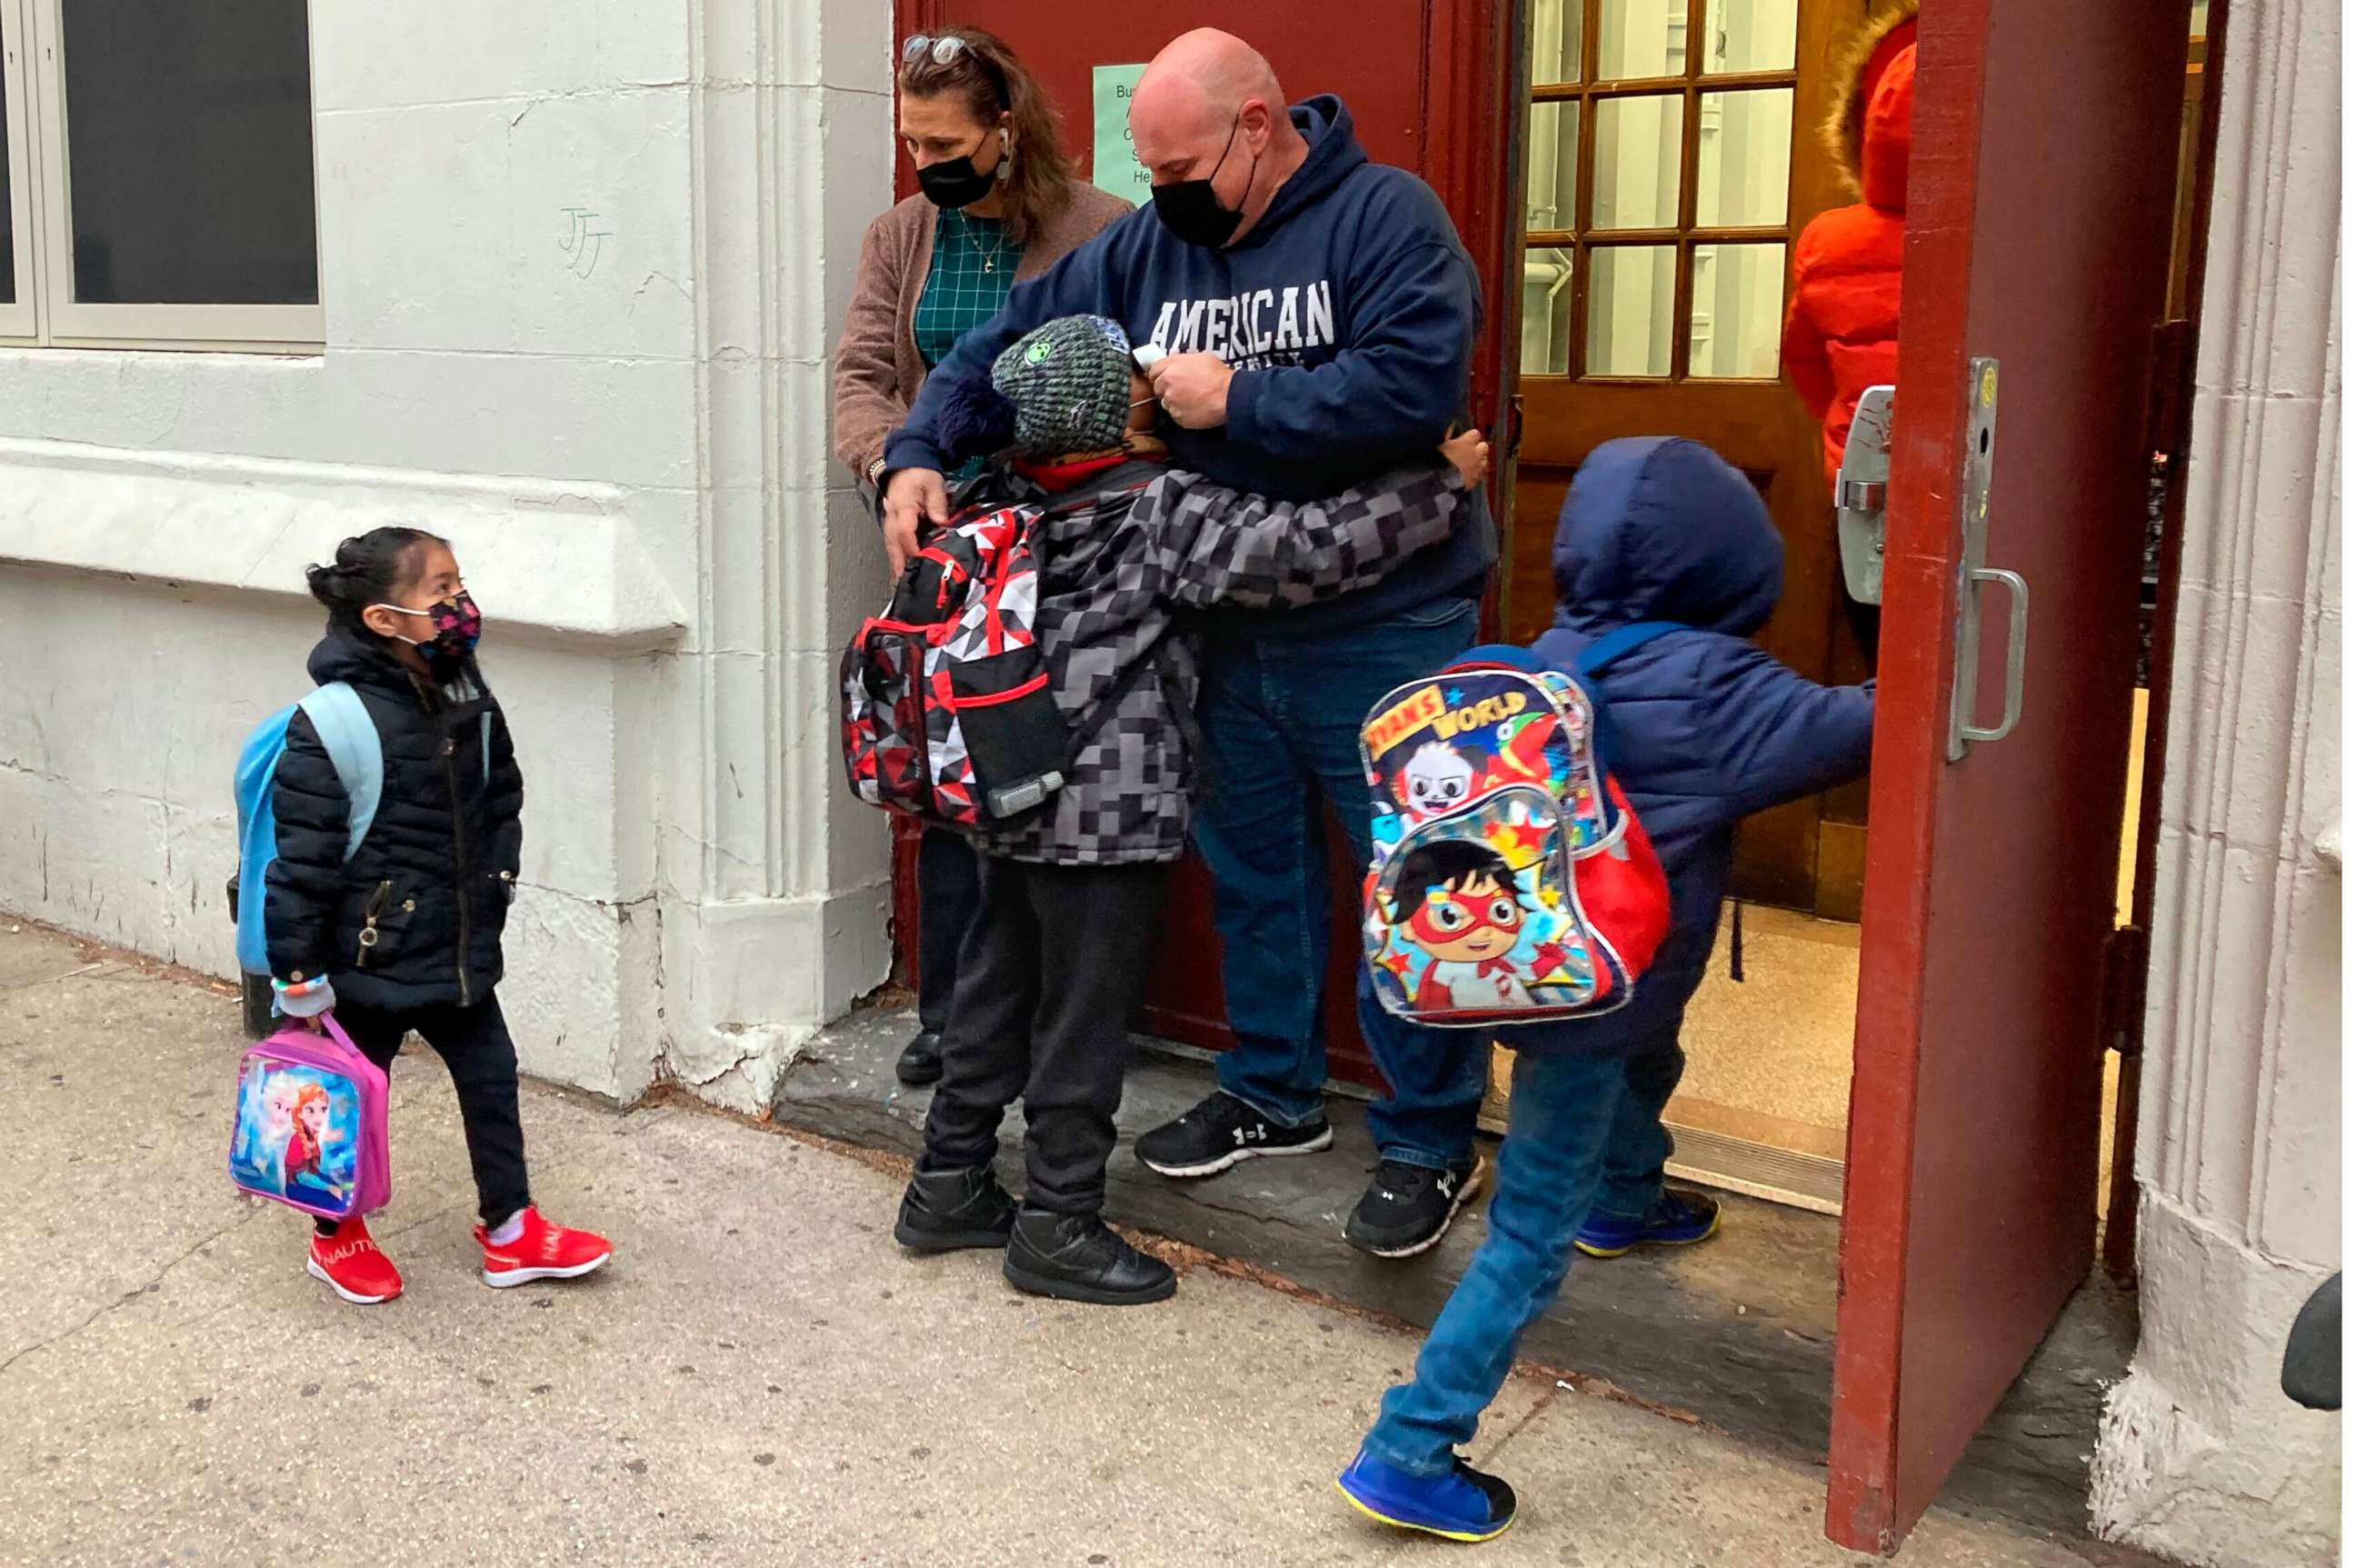 PHOTO: John Marro, the dean of students at P.S. 347, The American Sign Language and English Lower School, in New York, takes students' temperatures as they arrive on the first day after the holiday break, Monday, Jan. 3, 2022.